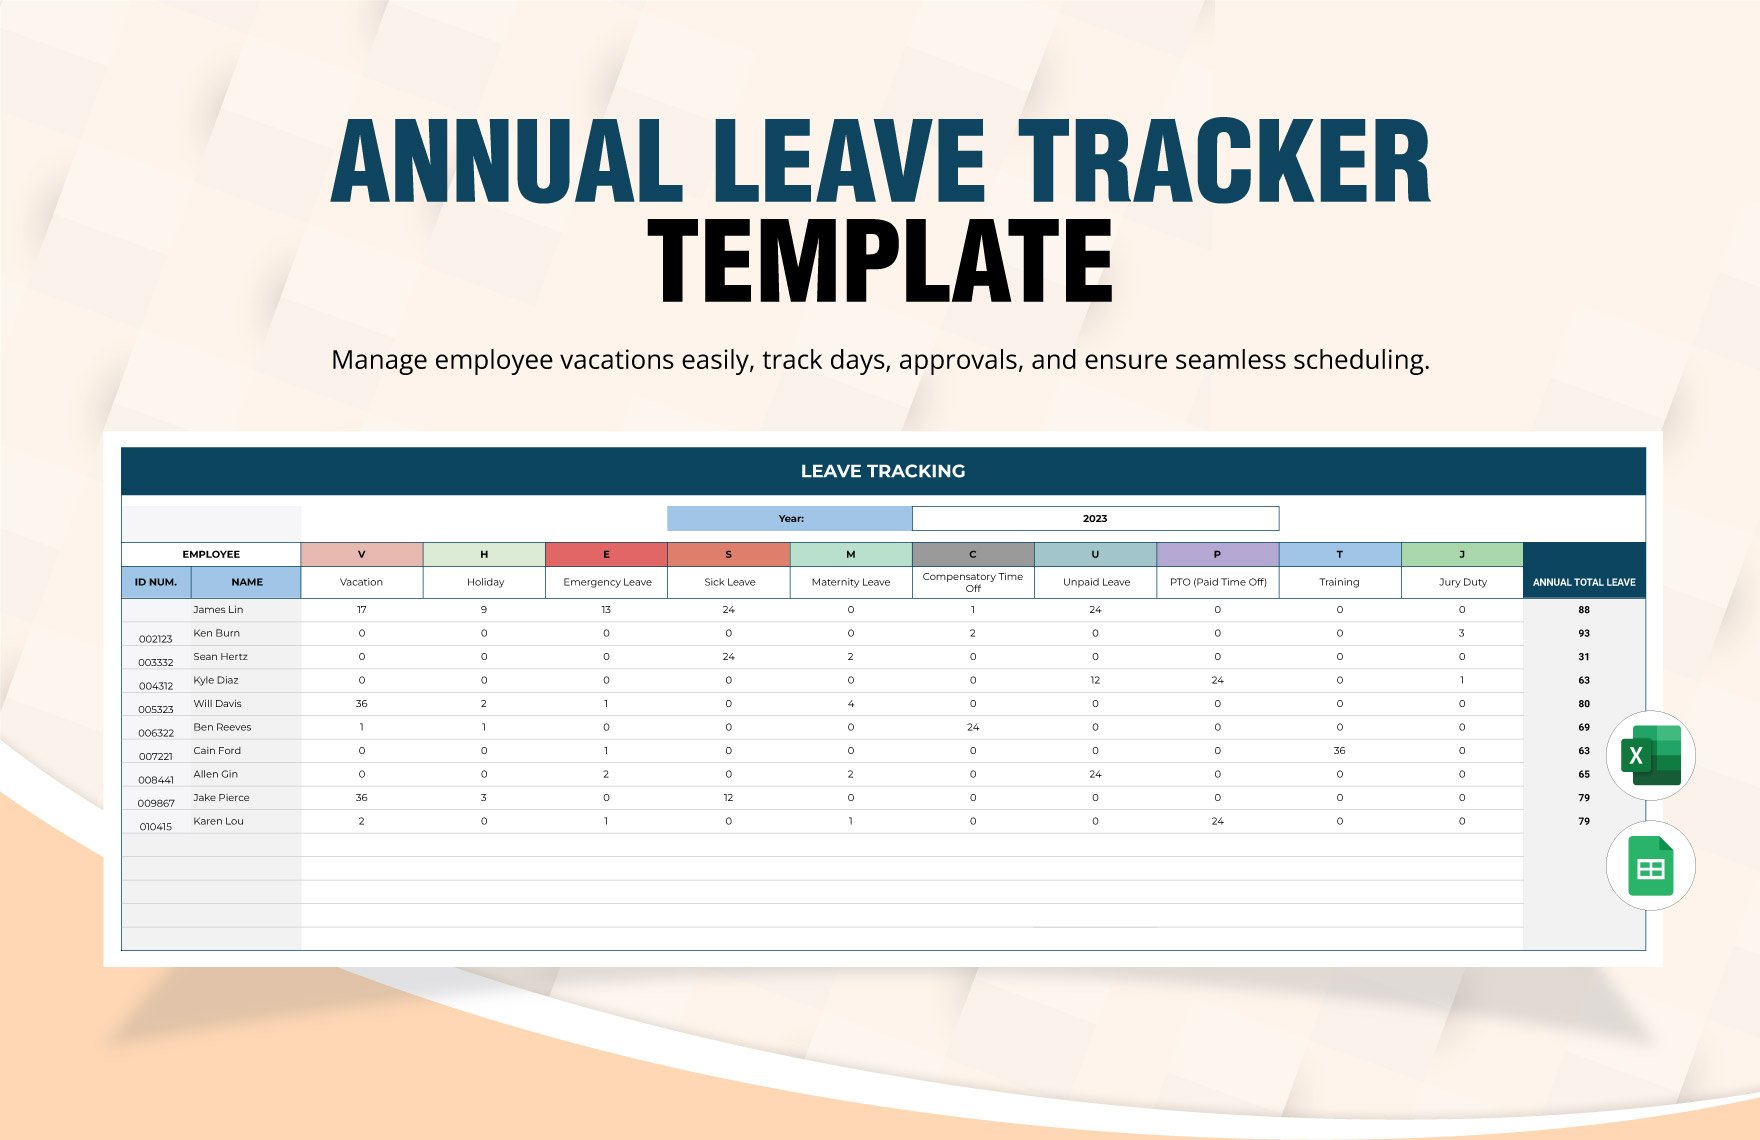 Annual Leave Tracker Template